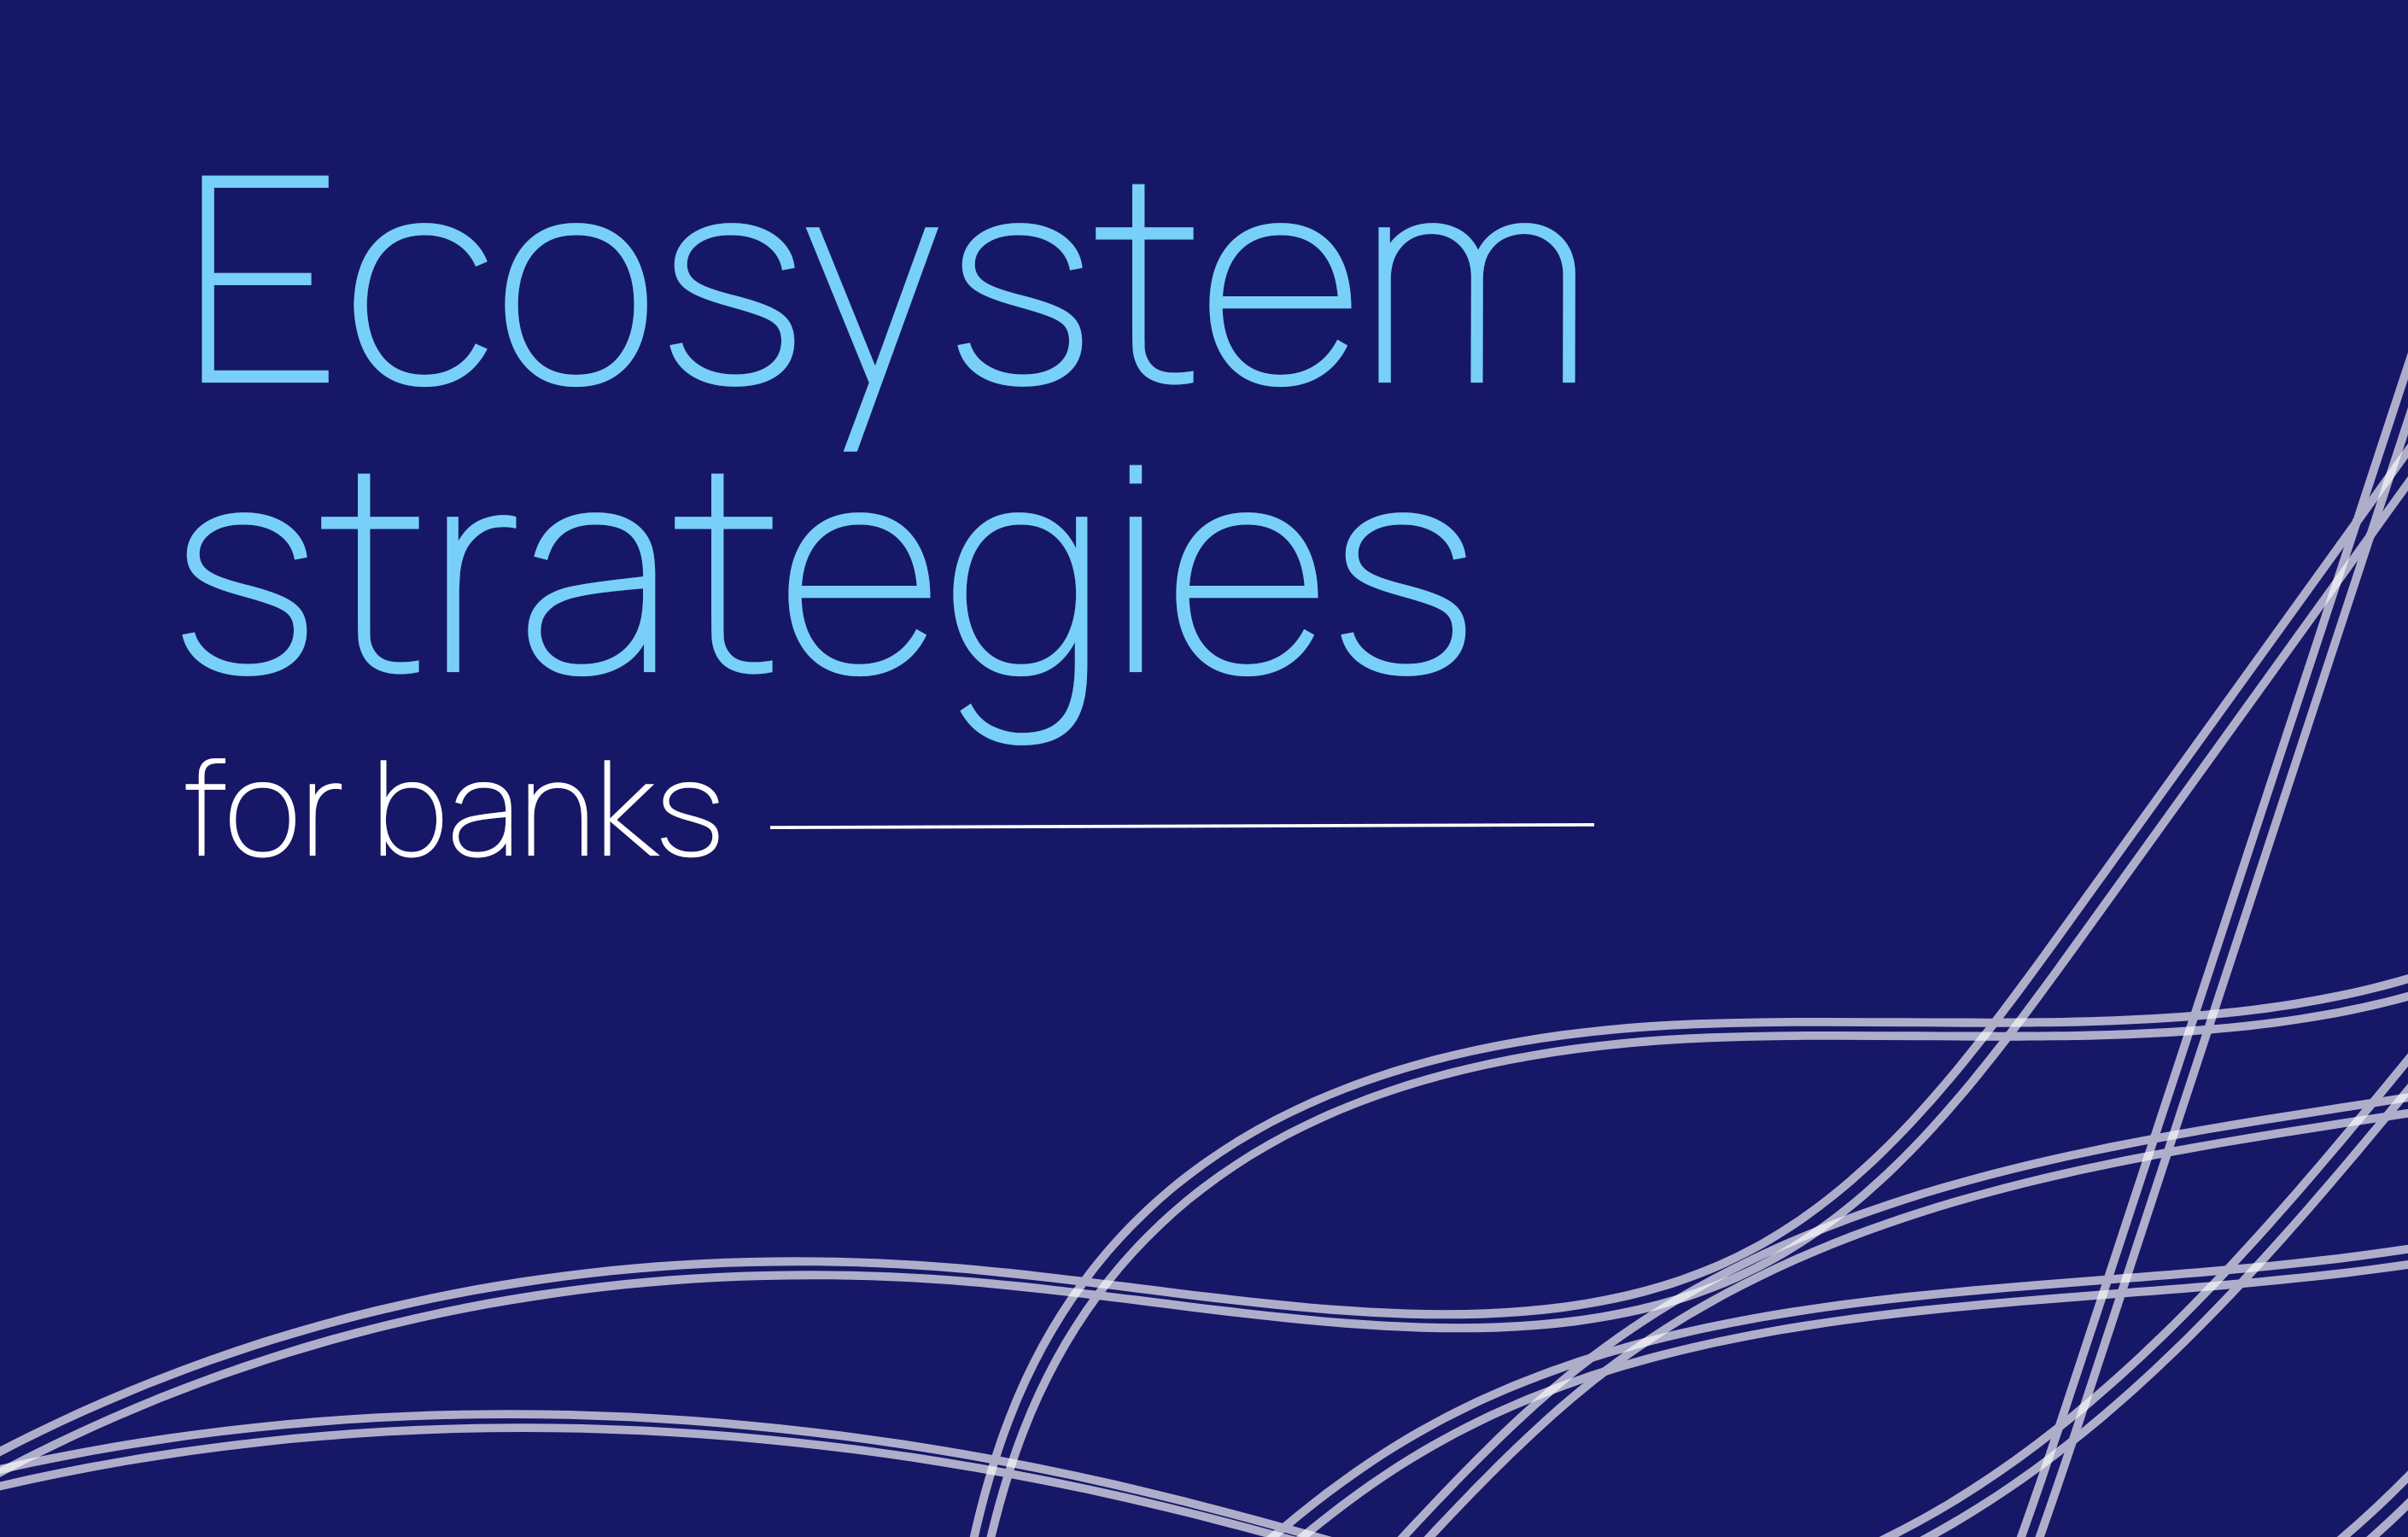 The power of ecosystem strategies for banks